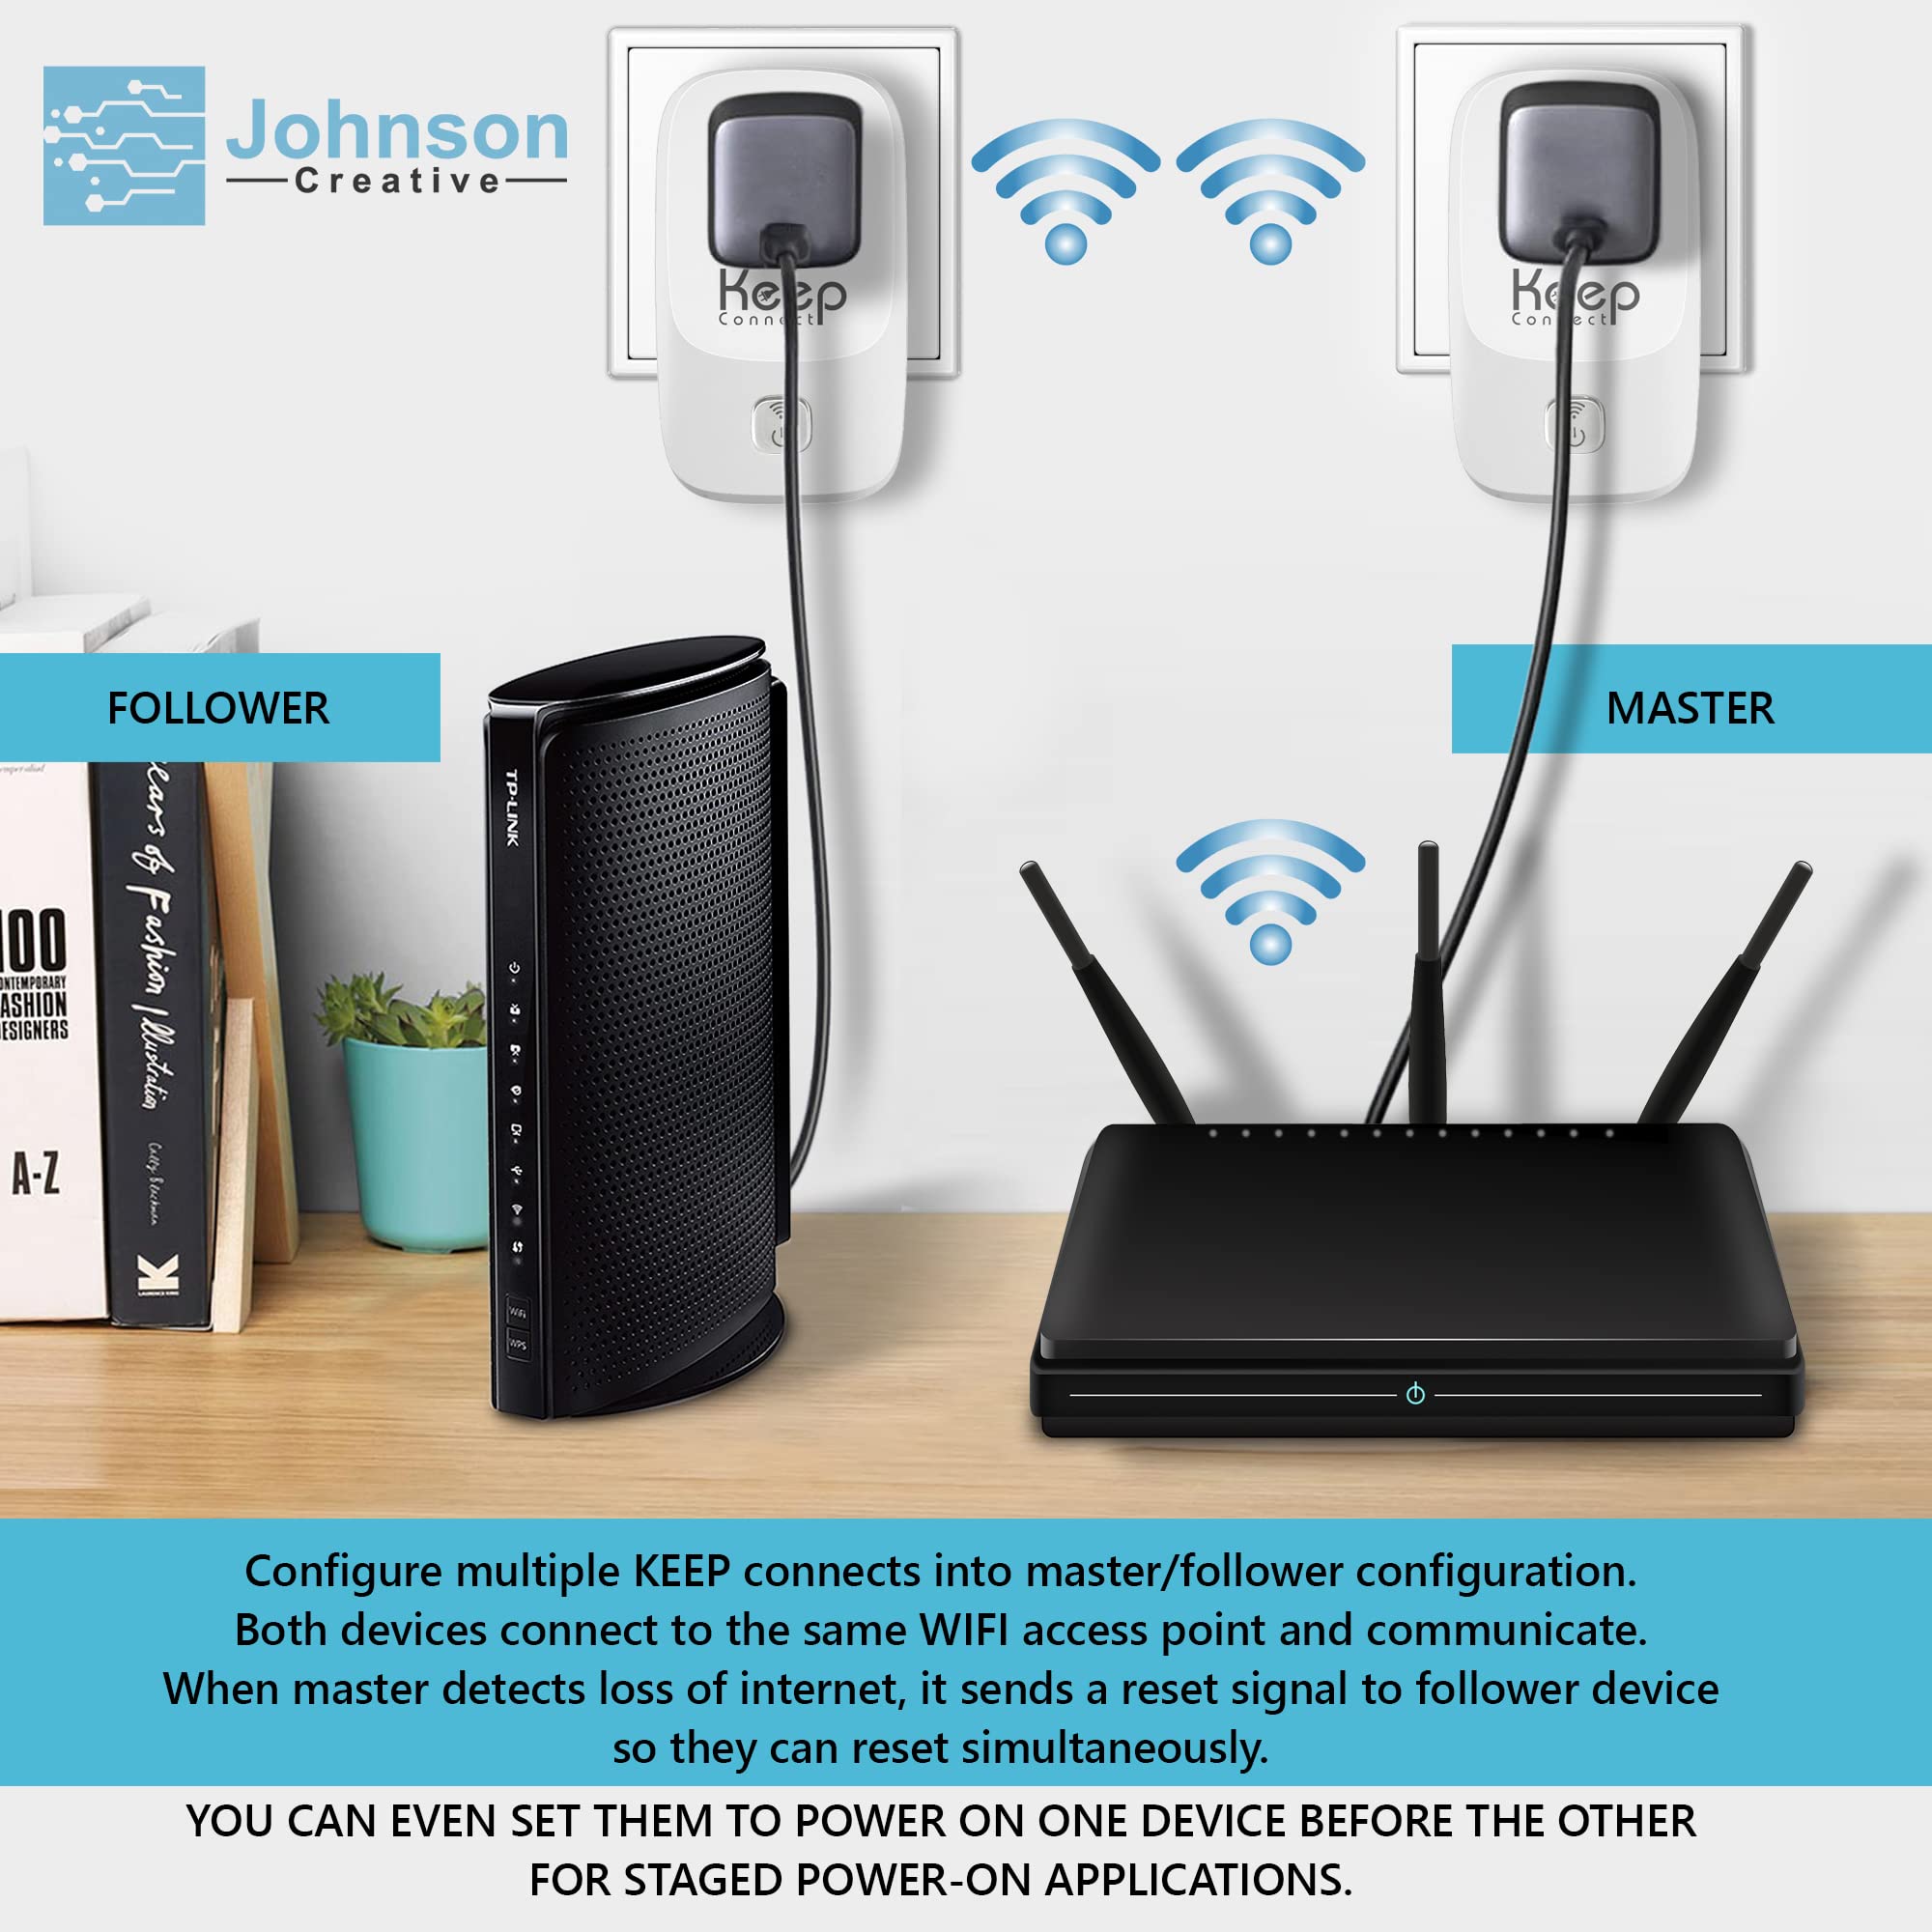 Ensure your device is connected to the internet
Restart your modem and router